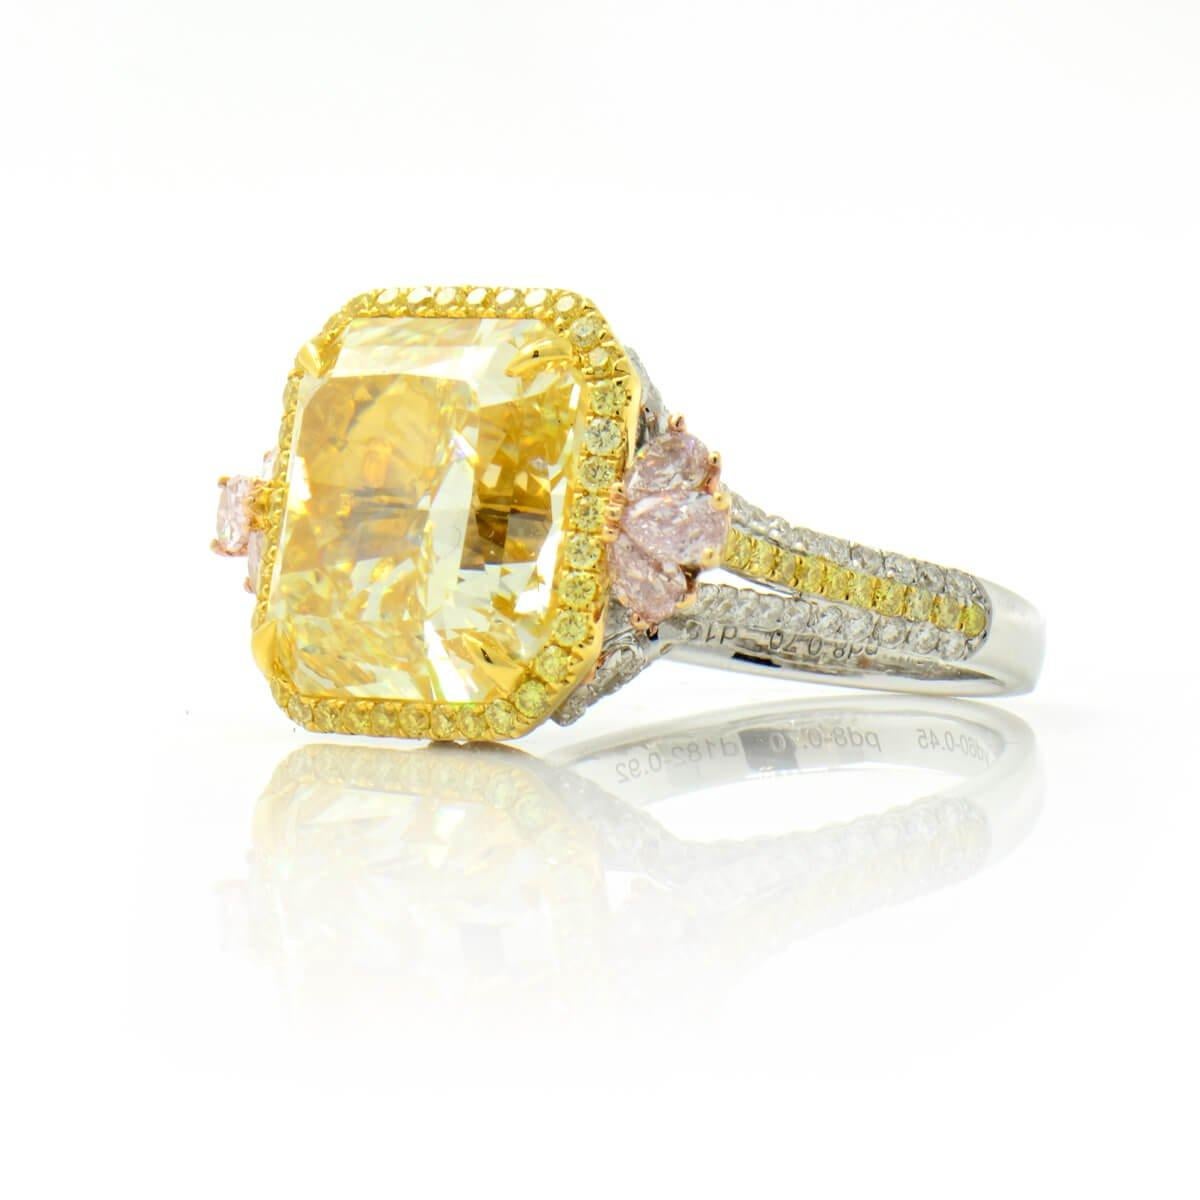 This once in a life time piece hosts one incredible 12.07 natural yellow diamond centre stone. It is stunningly compliment by smaller yellow stones surrounding it and pink stones either side, a variation of pink yellow and white diamonds around the